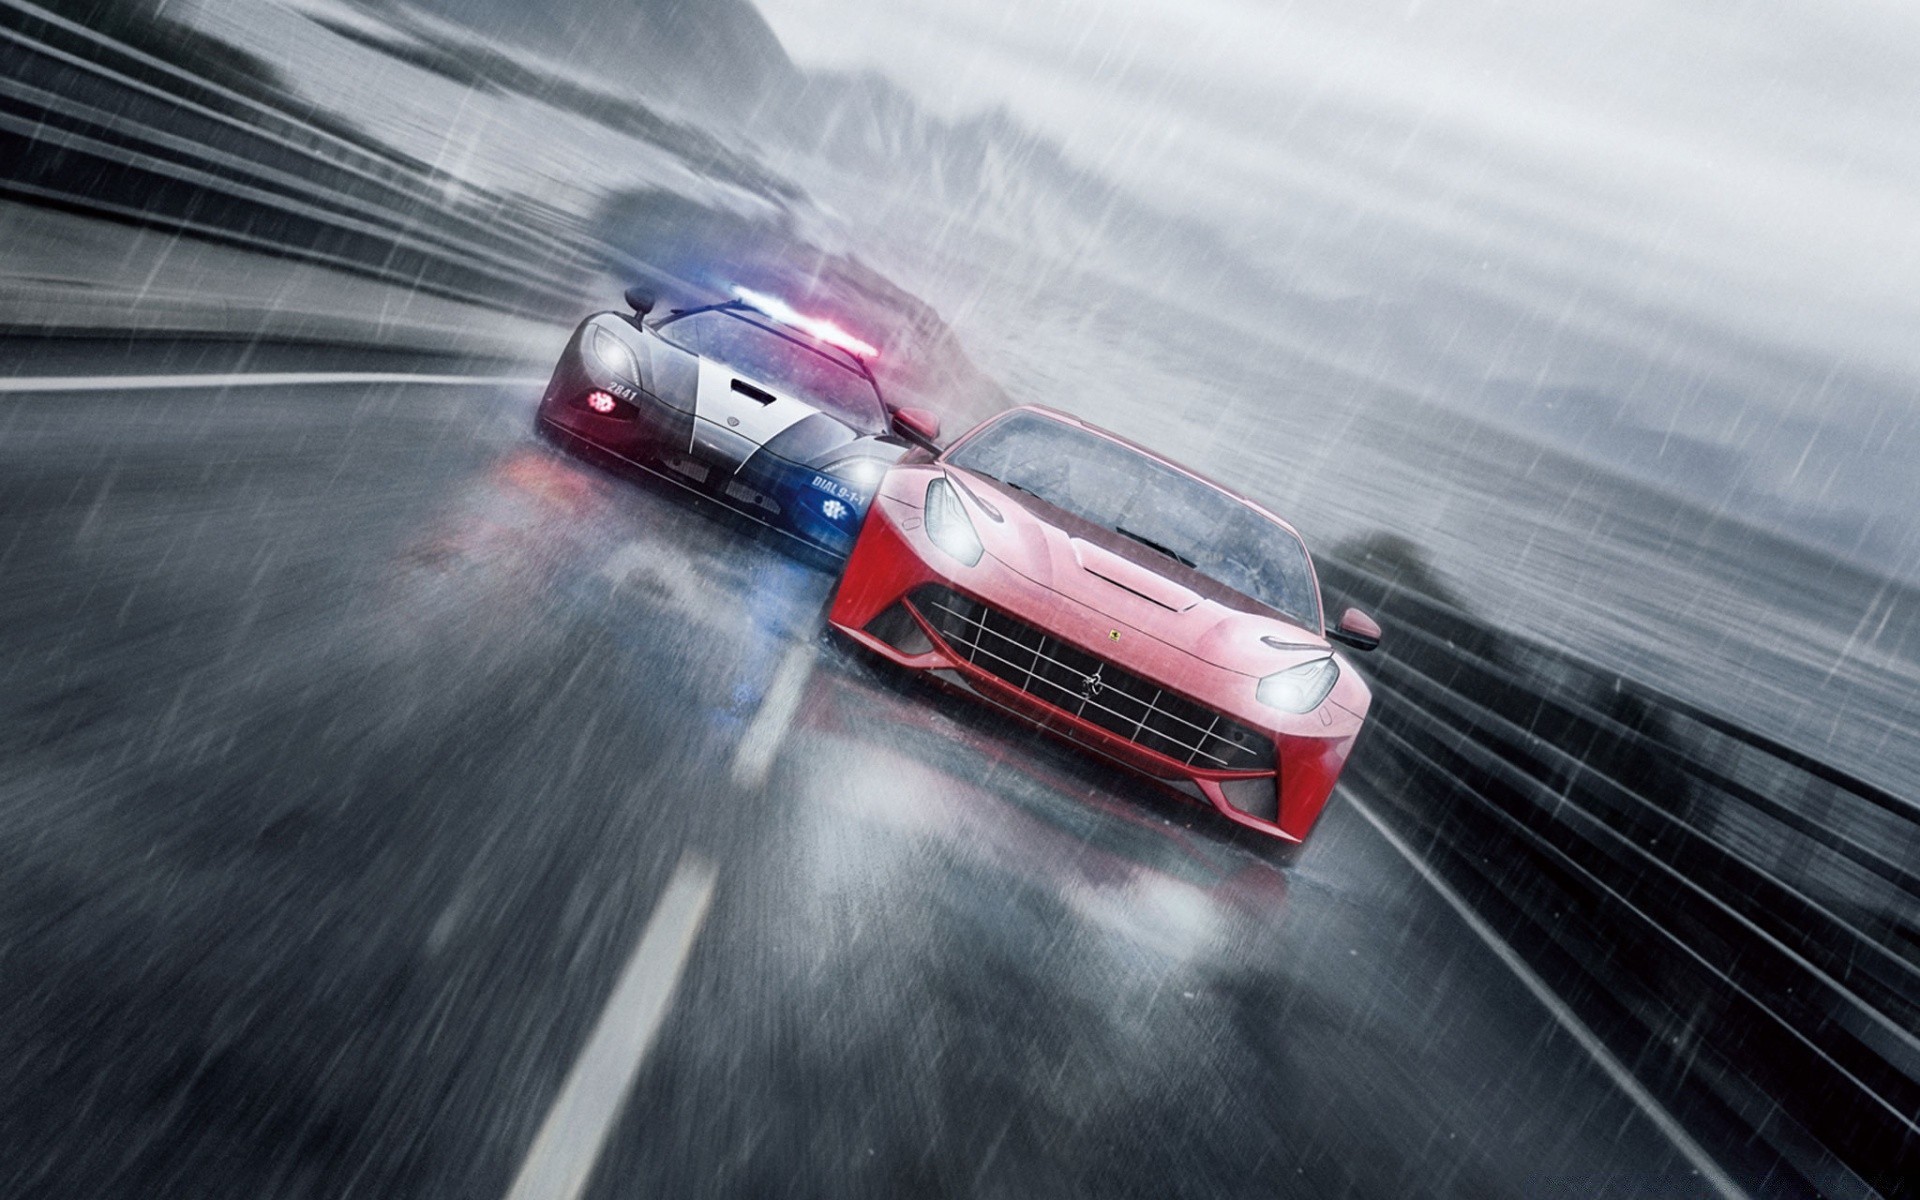 need for speed fast blur hurry car transportation system road speed vehicle race traffic drive motion action asphalt travel